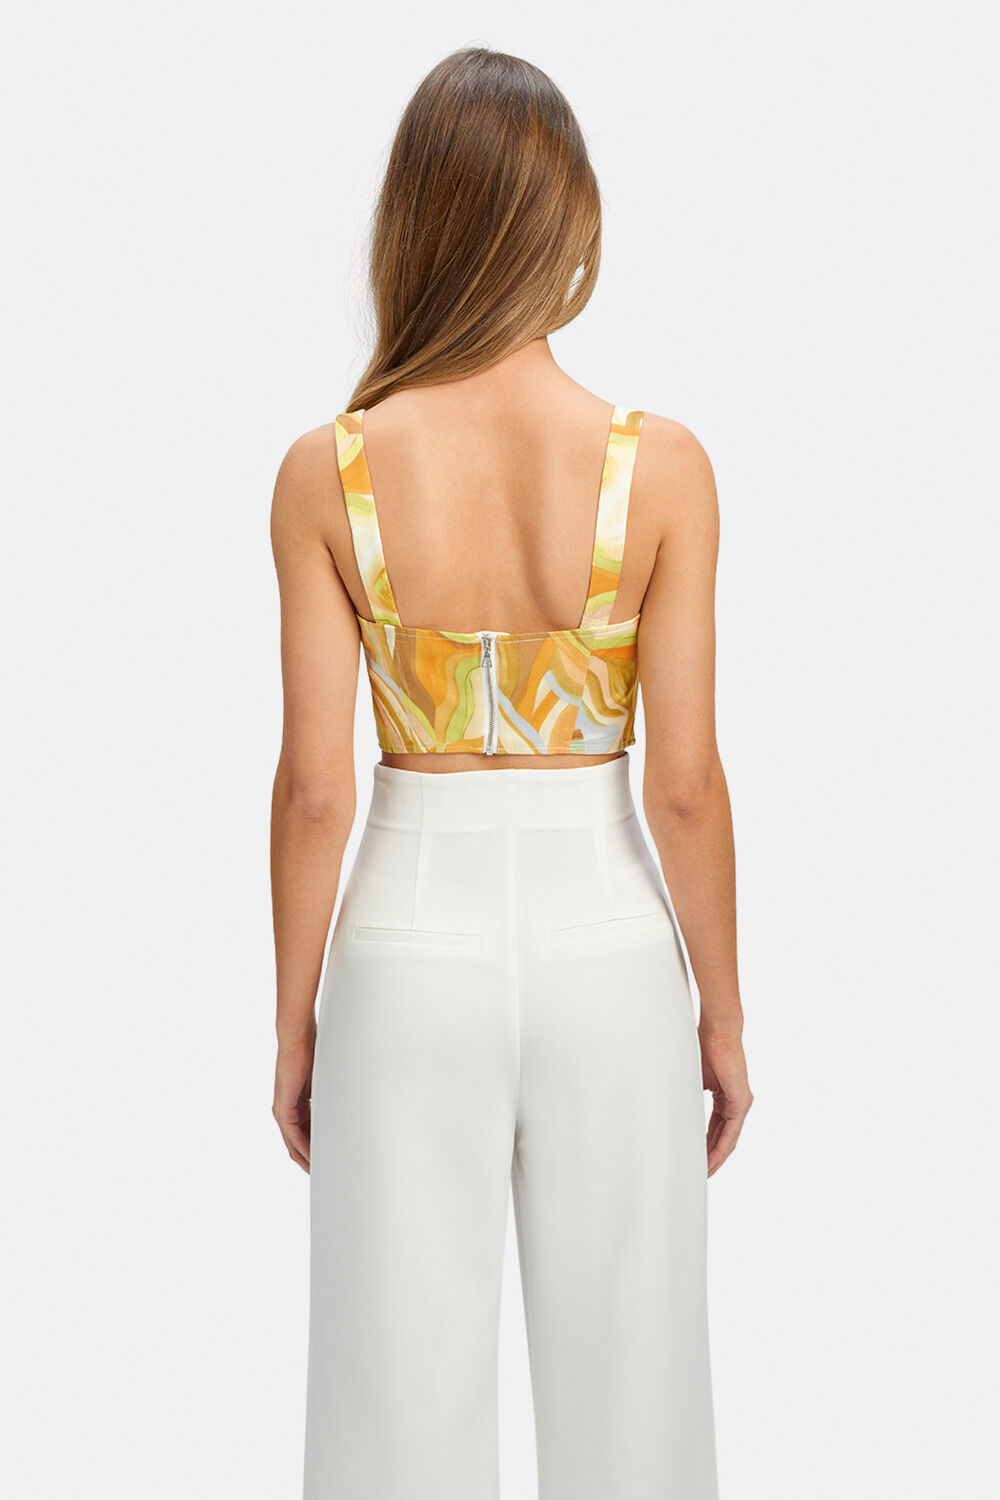 TIANI CORSET BUSTIER in colour SPECTRA YELLOW